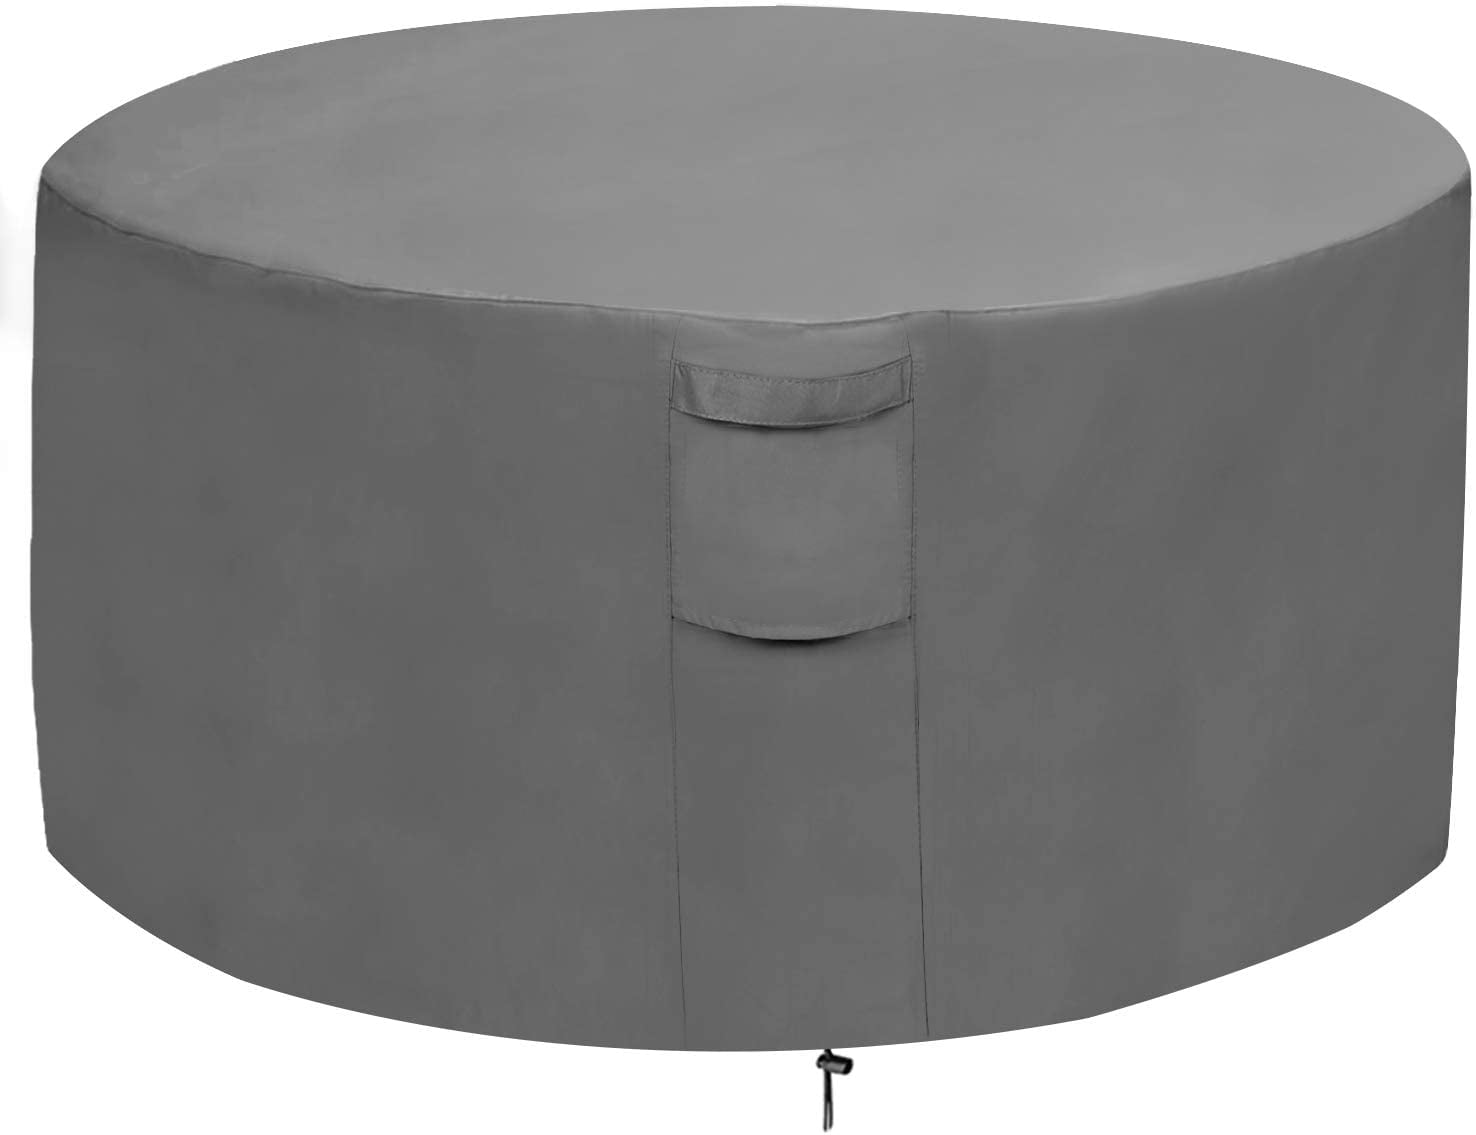 32" 600D Oxford Fir Pit Round Patio Bowl Cover Heavy Duty Waterproof Protector 